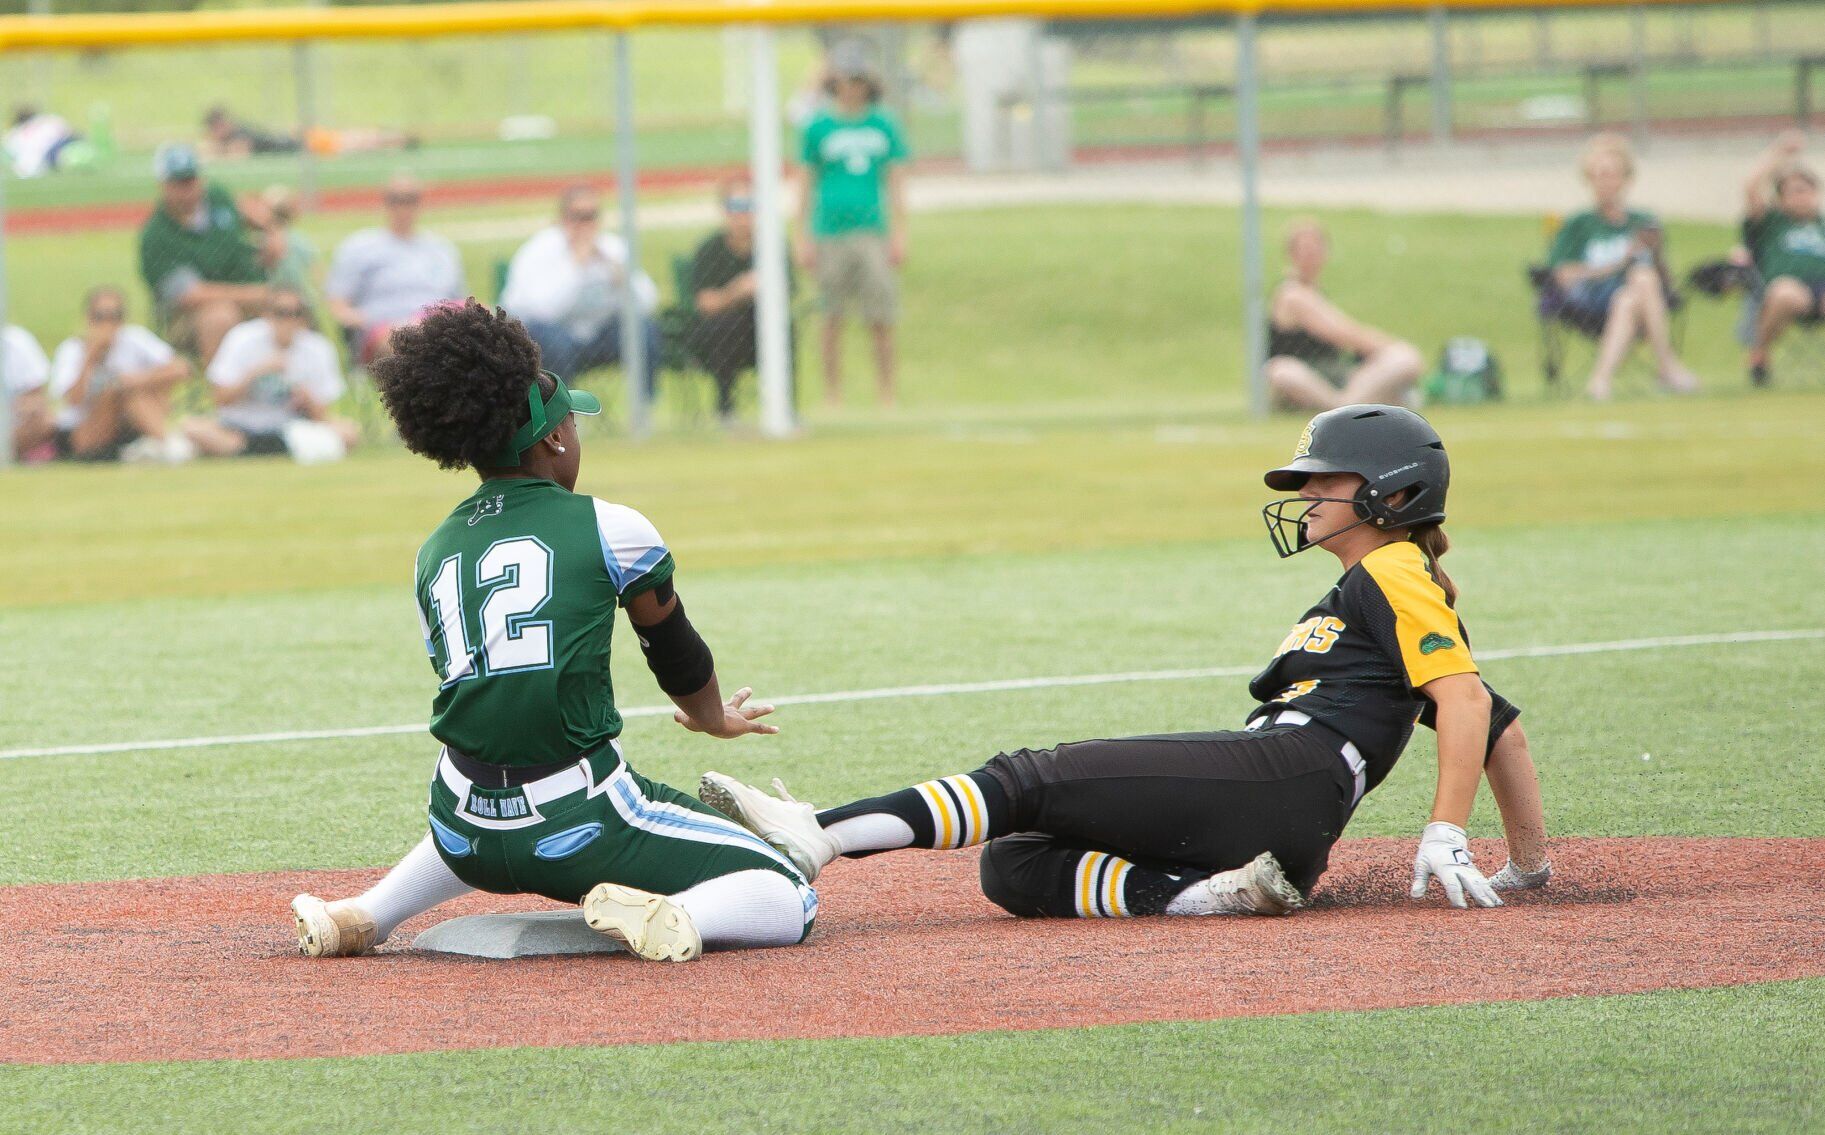 It’s a three-peat for St. Amant in softball. See how Gators did it again